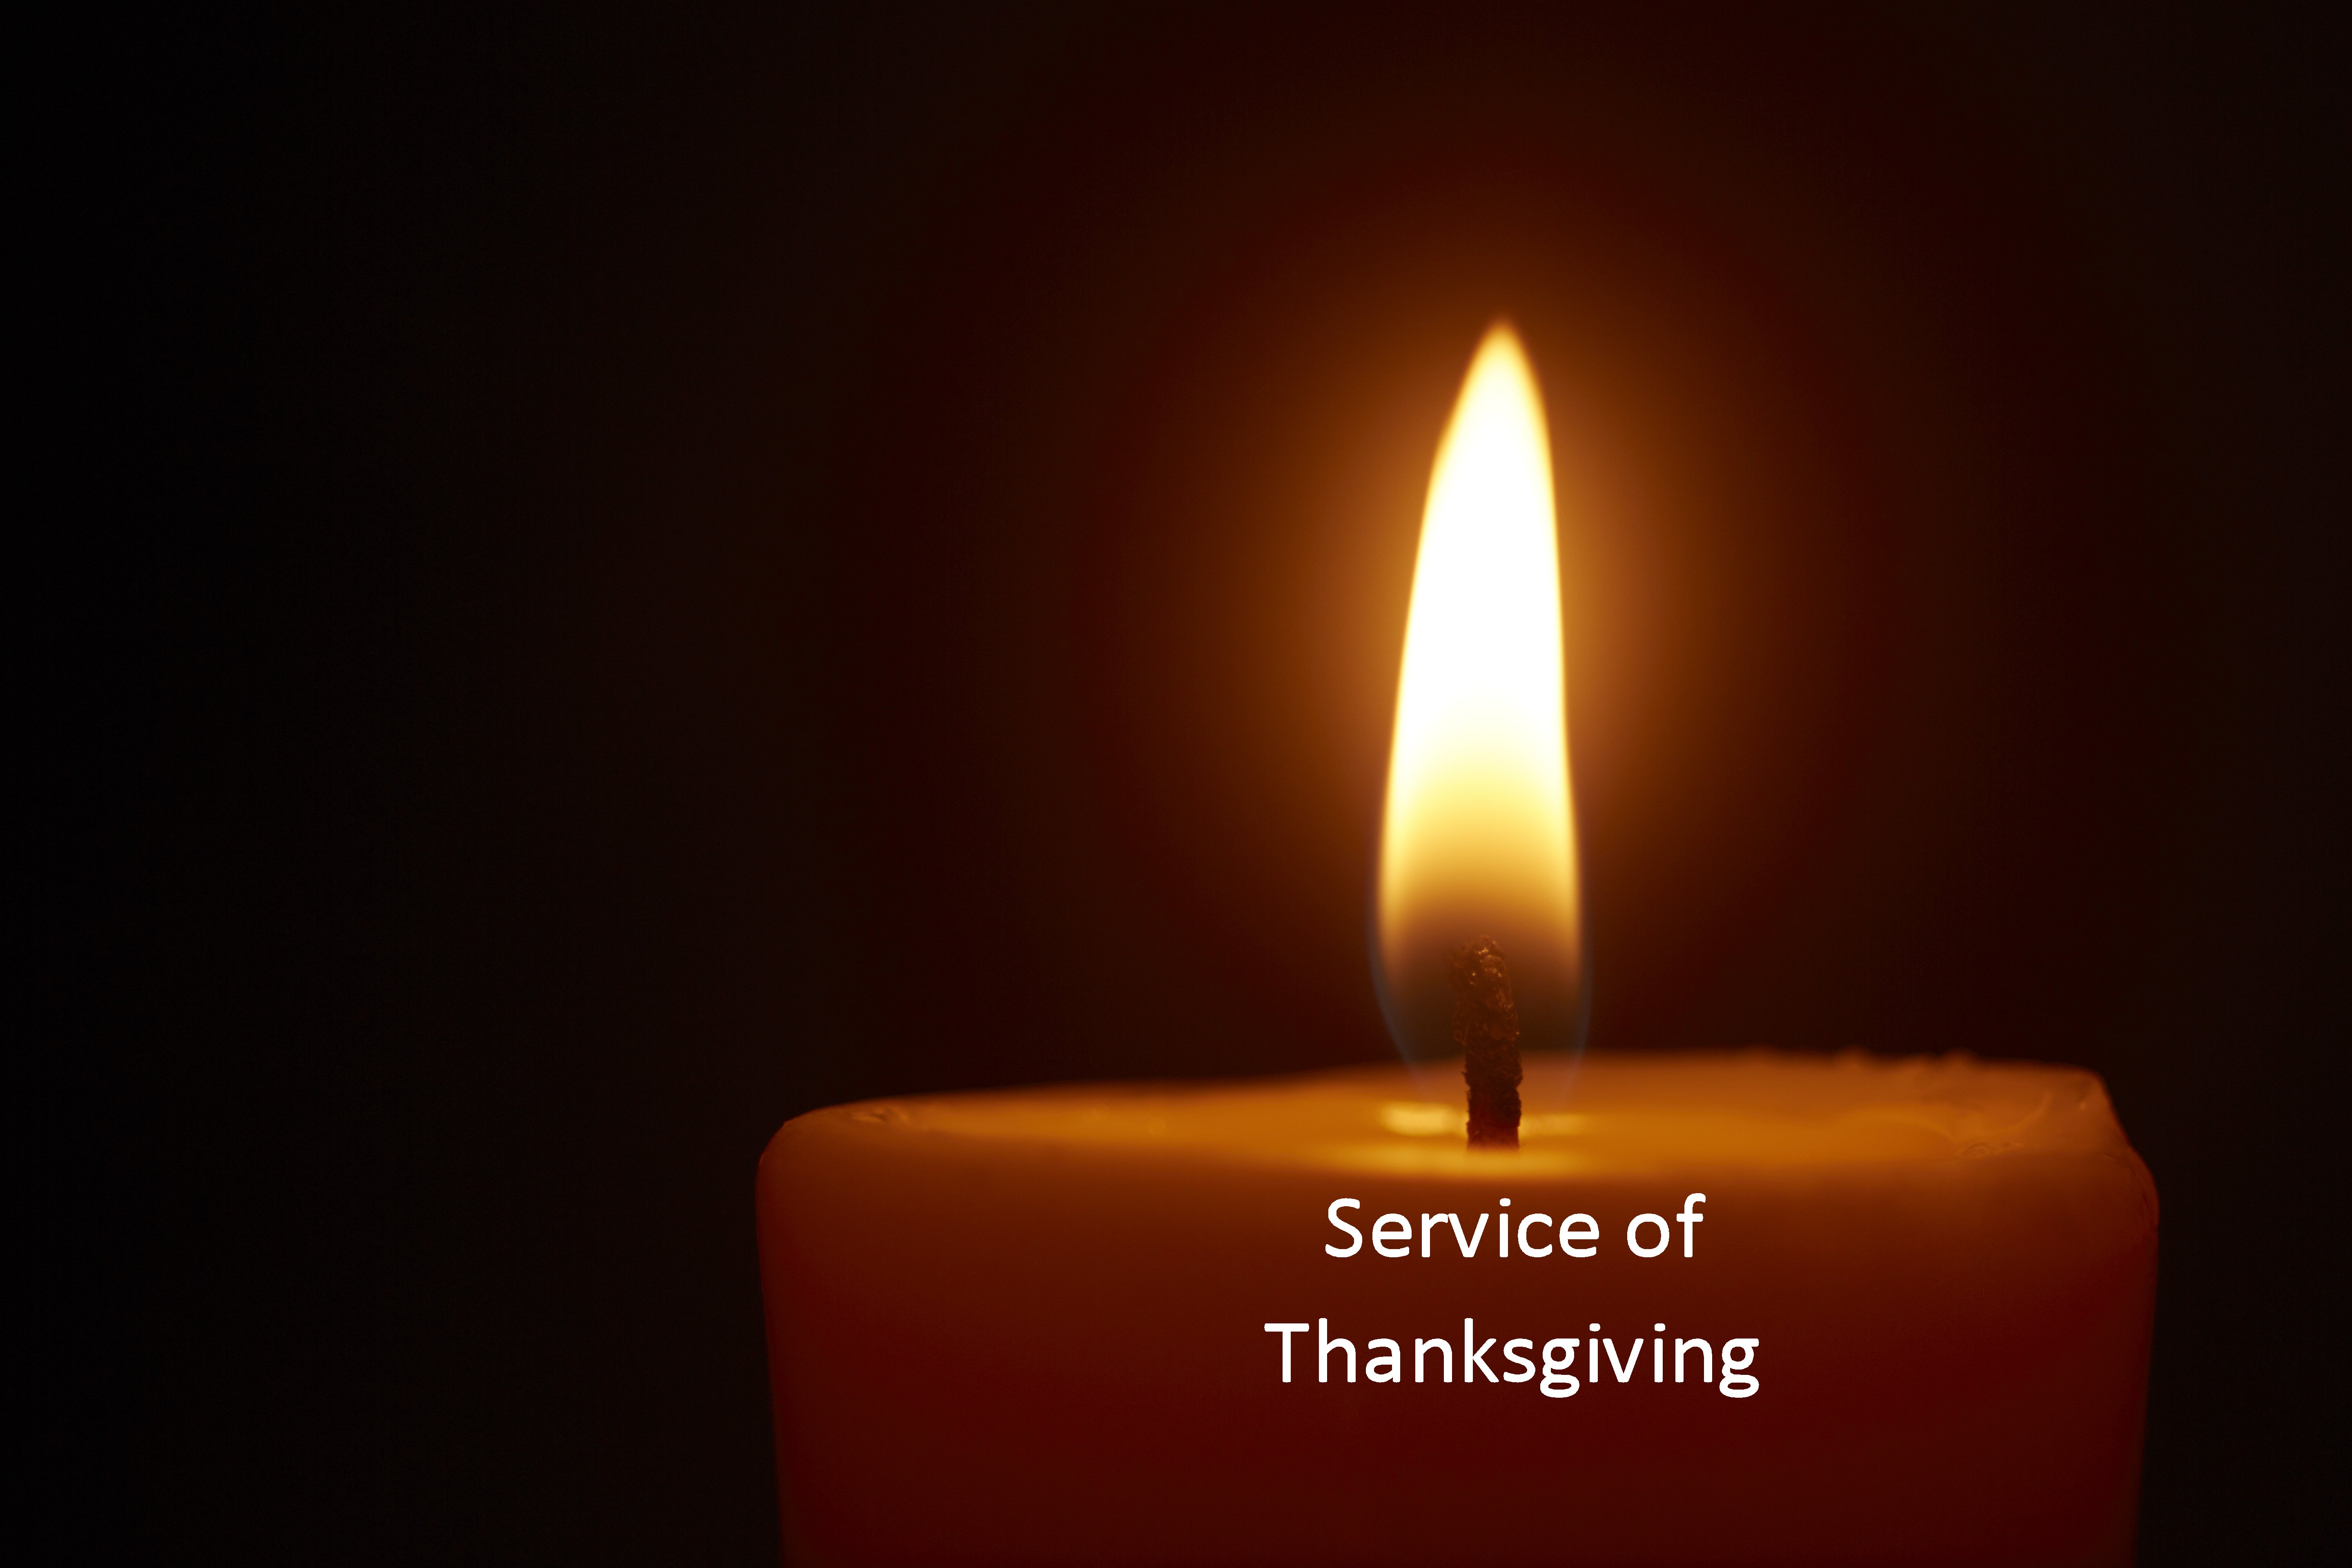 Service of Thanksgiving